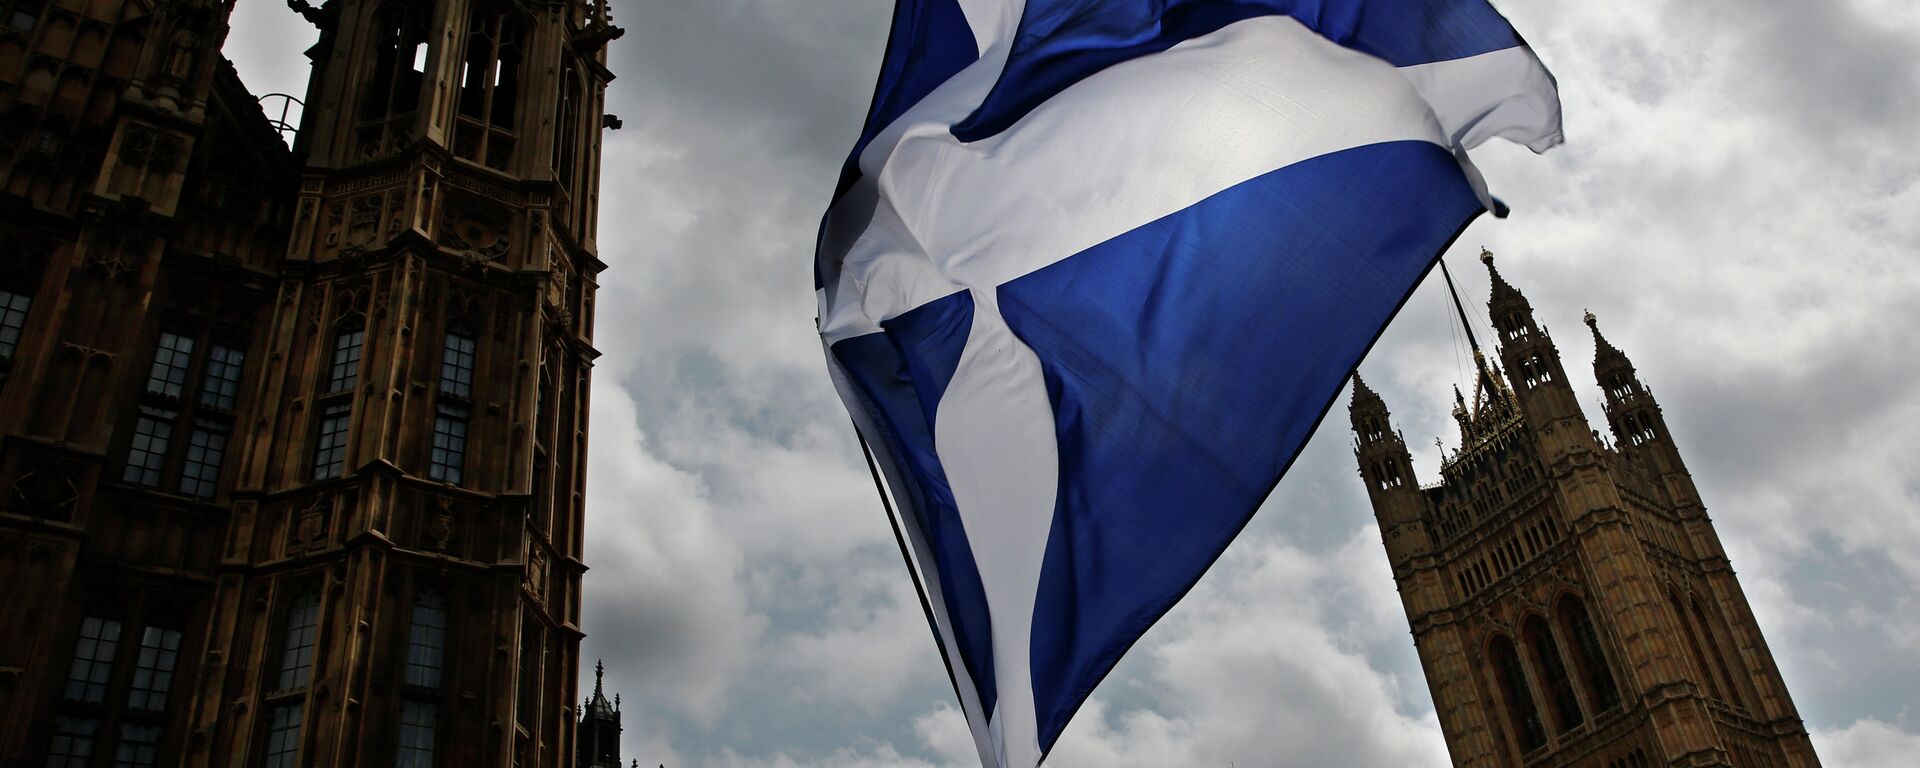 A member of public flies a giant Scottish Saltire flag outside the Houses of Parliament shortly before Scotland First Minister Nicola Sturgeon posed with newly-elected Scottish National Party (SNP) MPs during a photocall in London on May 11, 2015 - Sputnik International, 1920, 30.11.2020